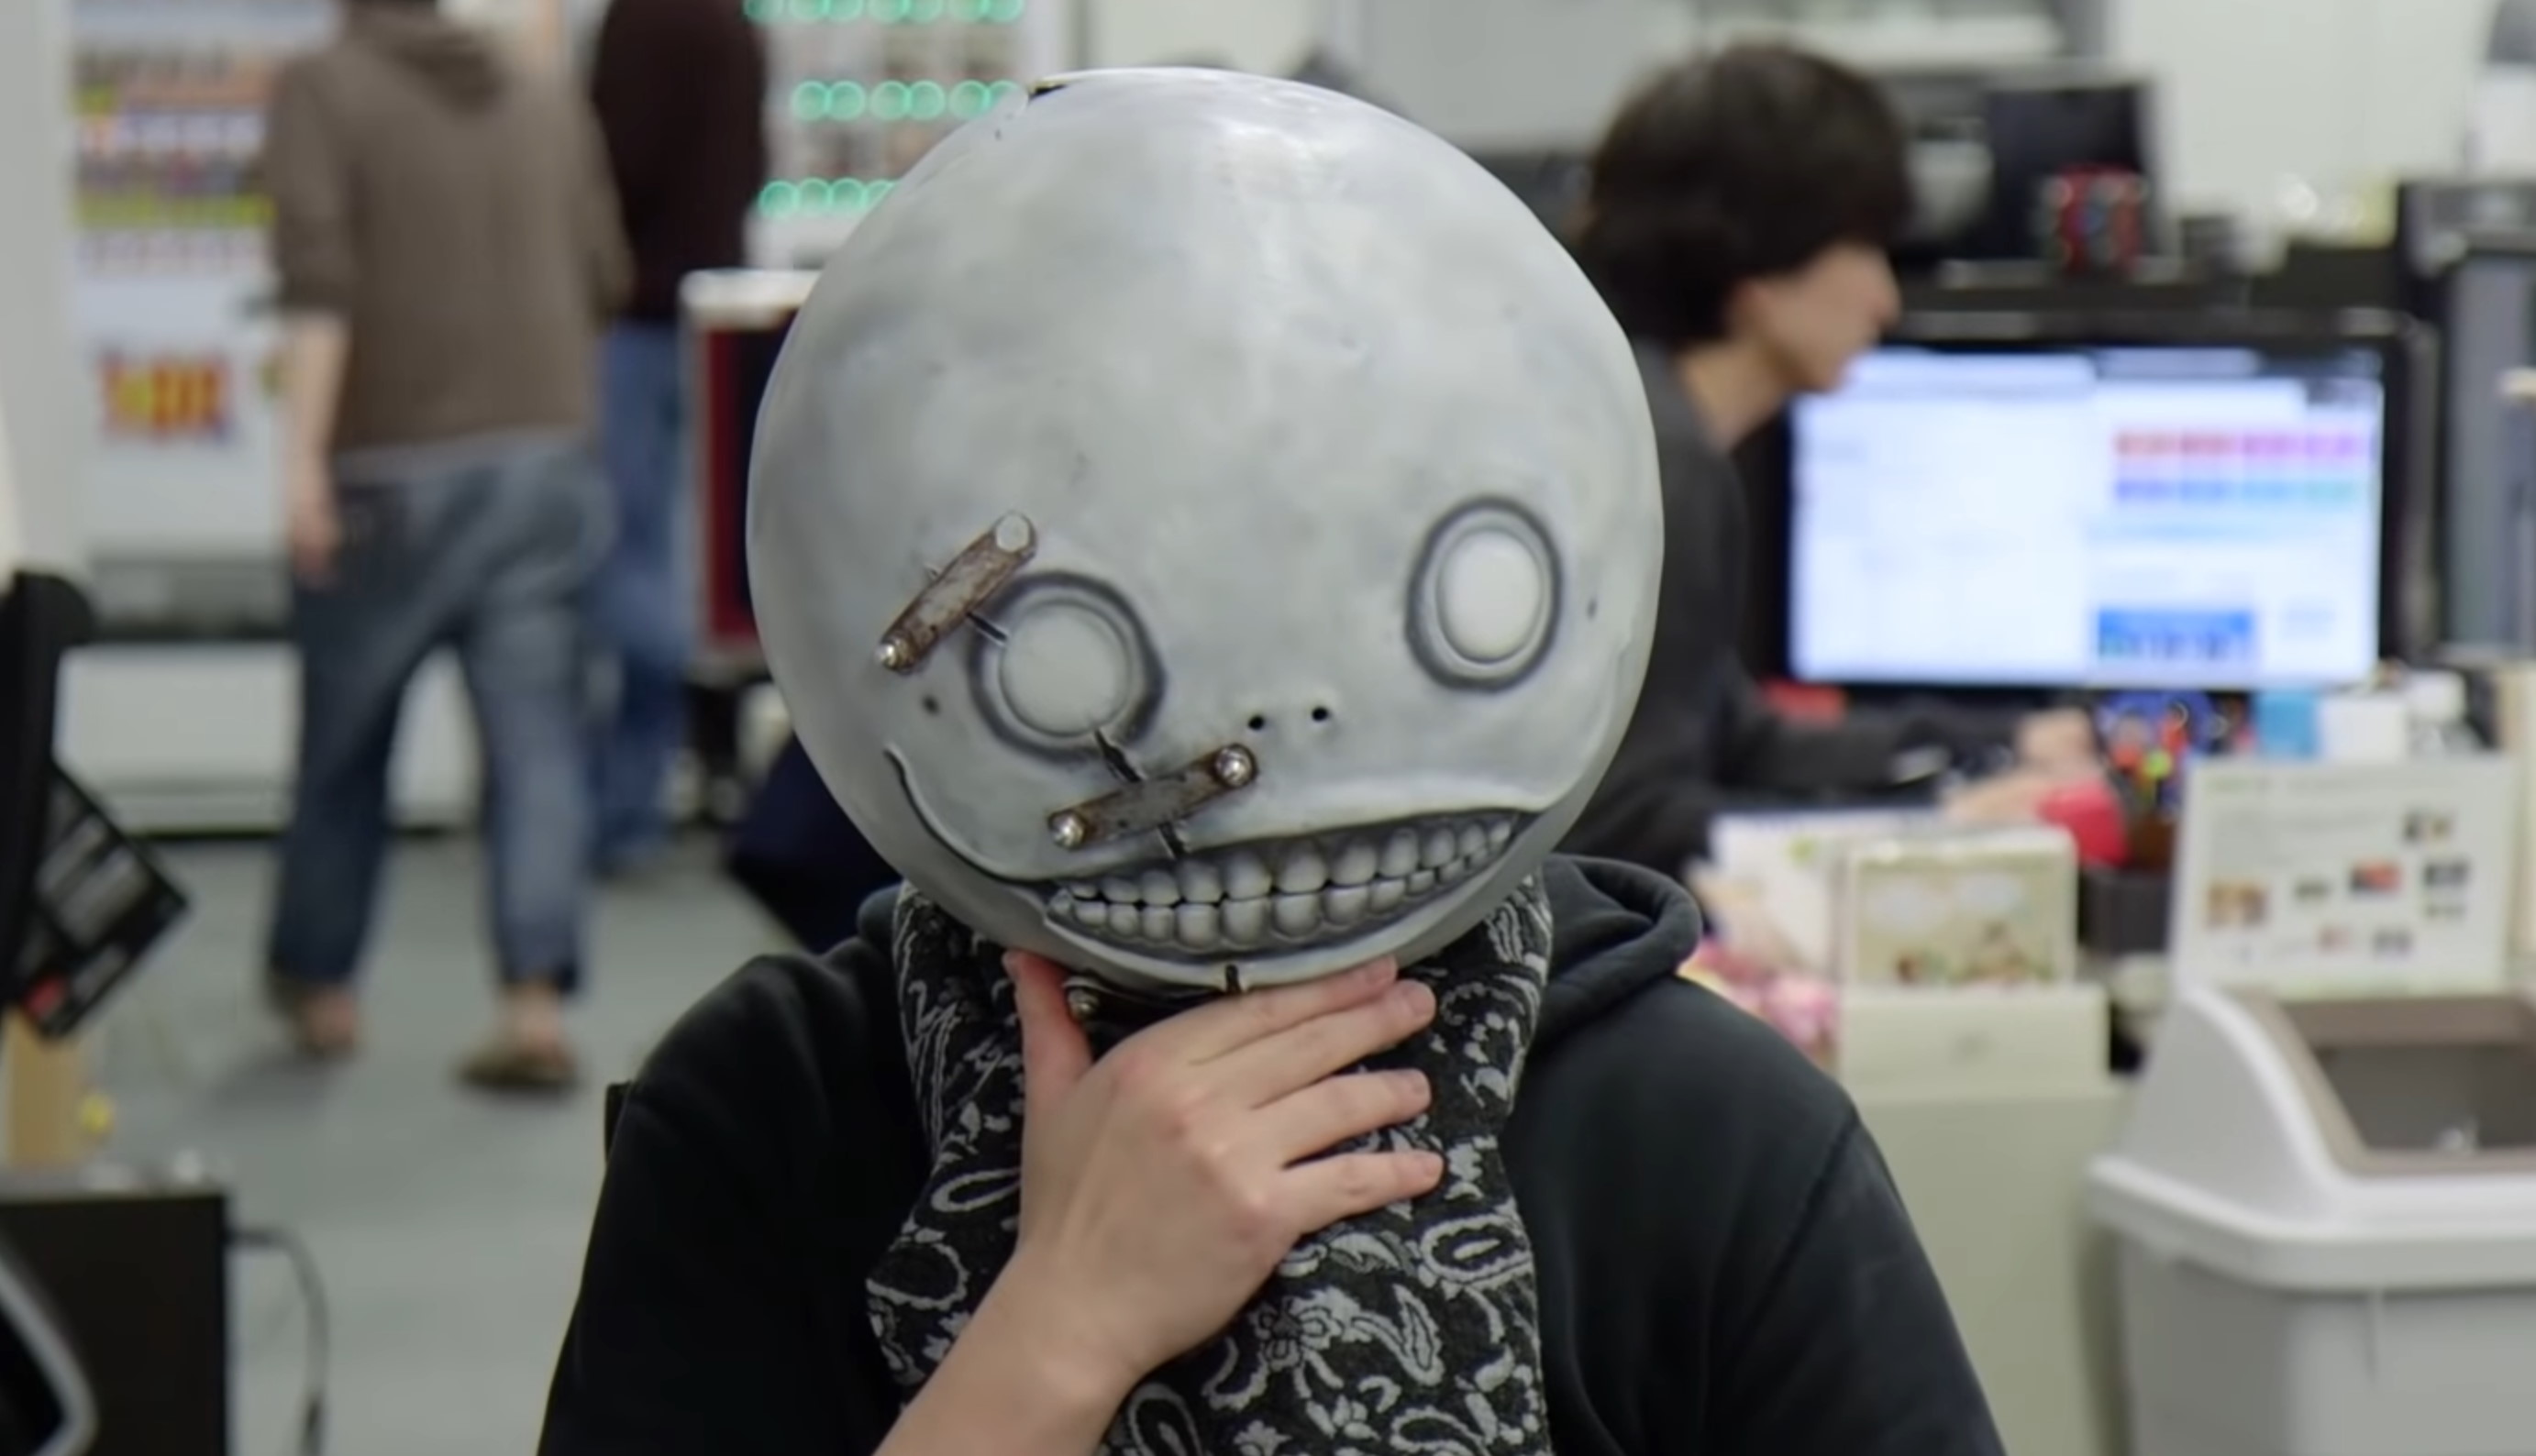 NieR producer promises the series will continue as long as creator Yoko Taro is alive to work on it